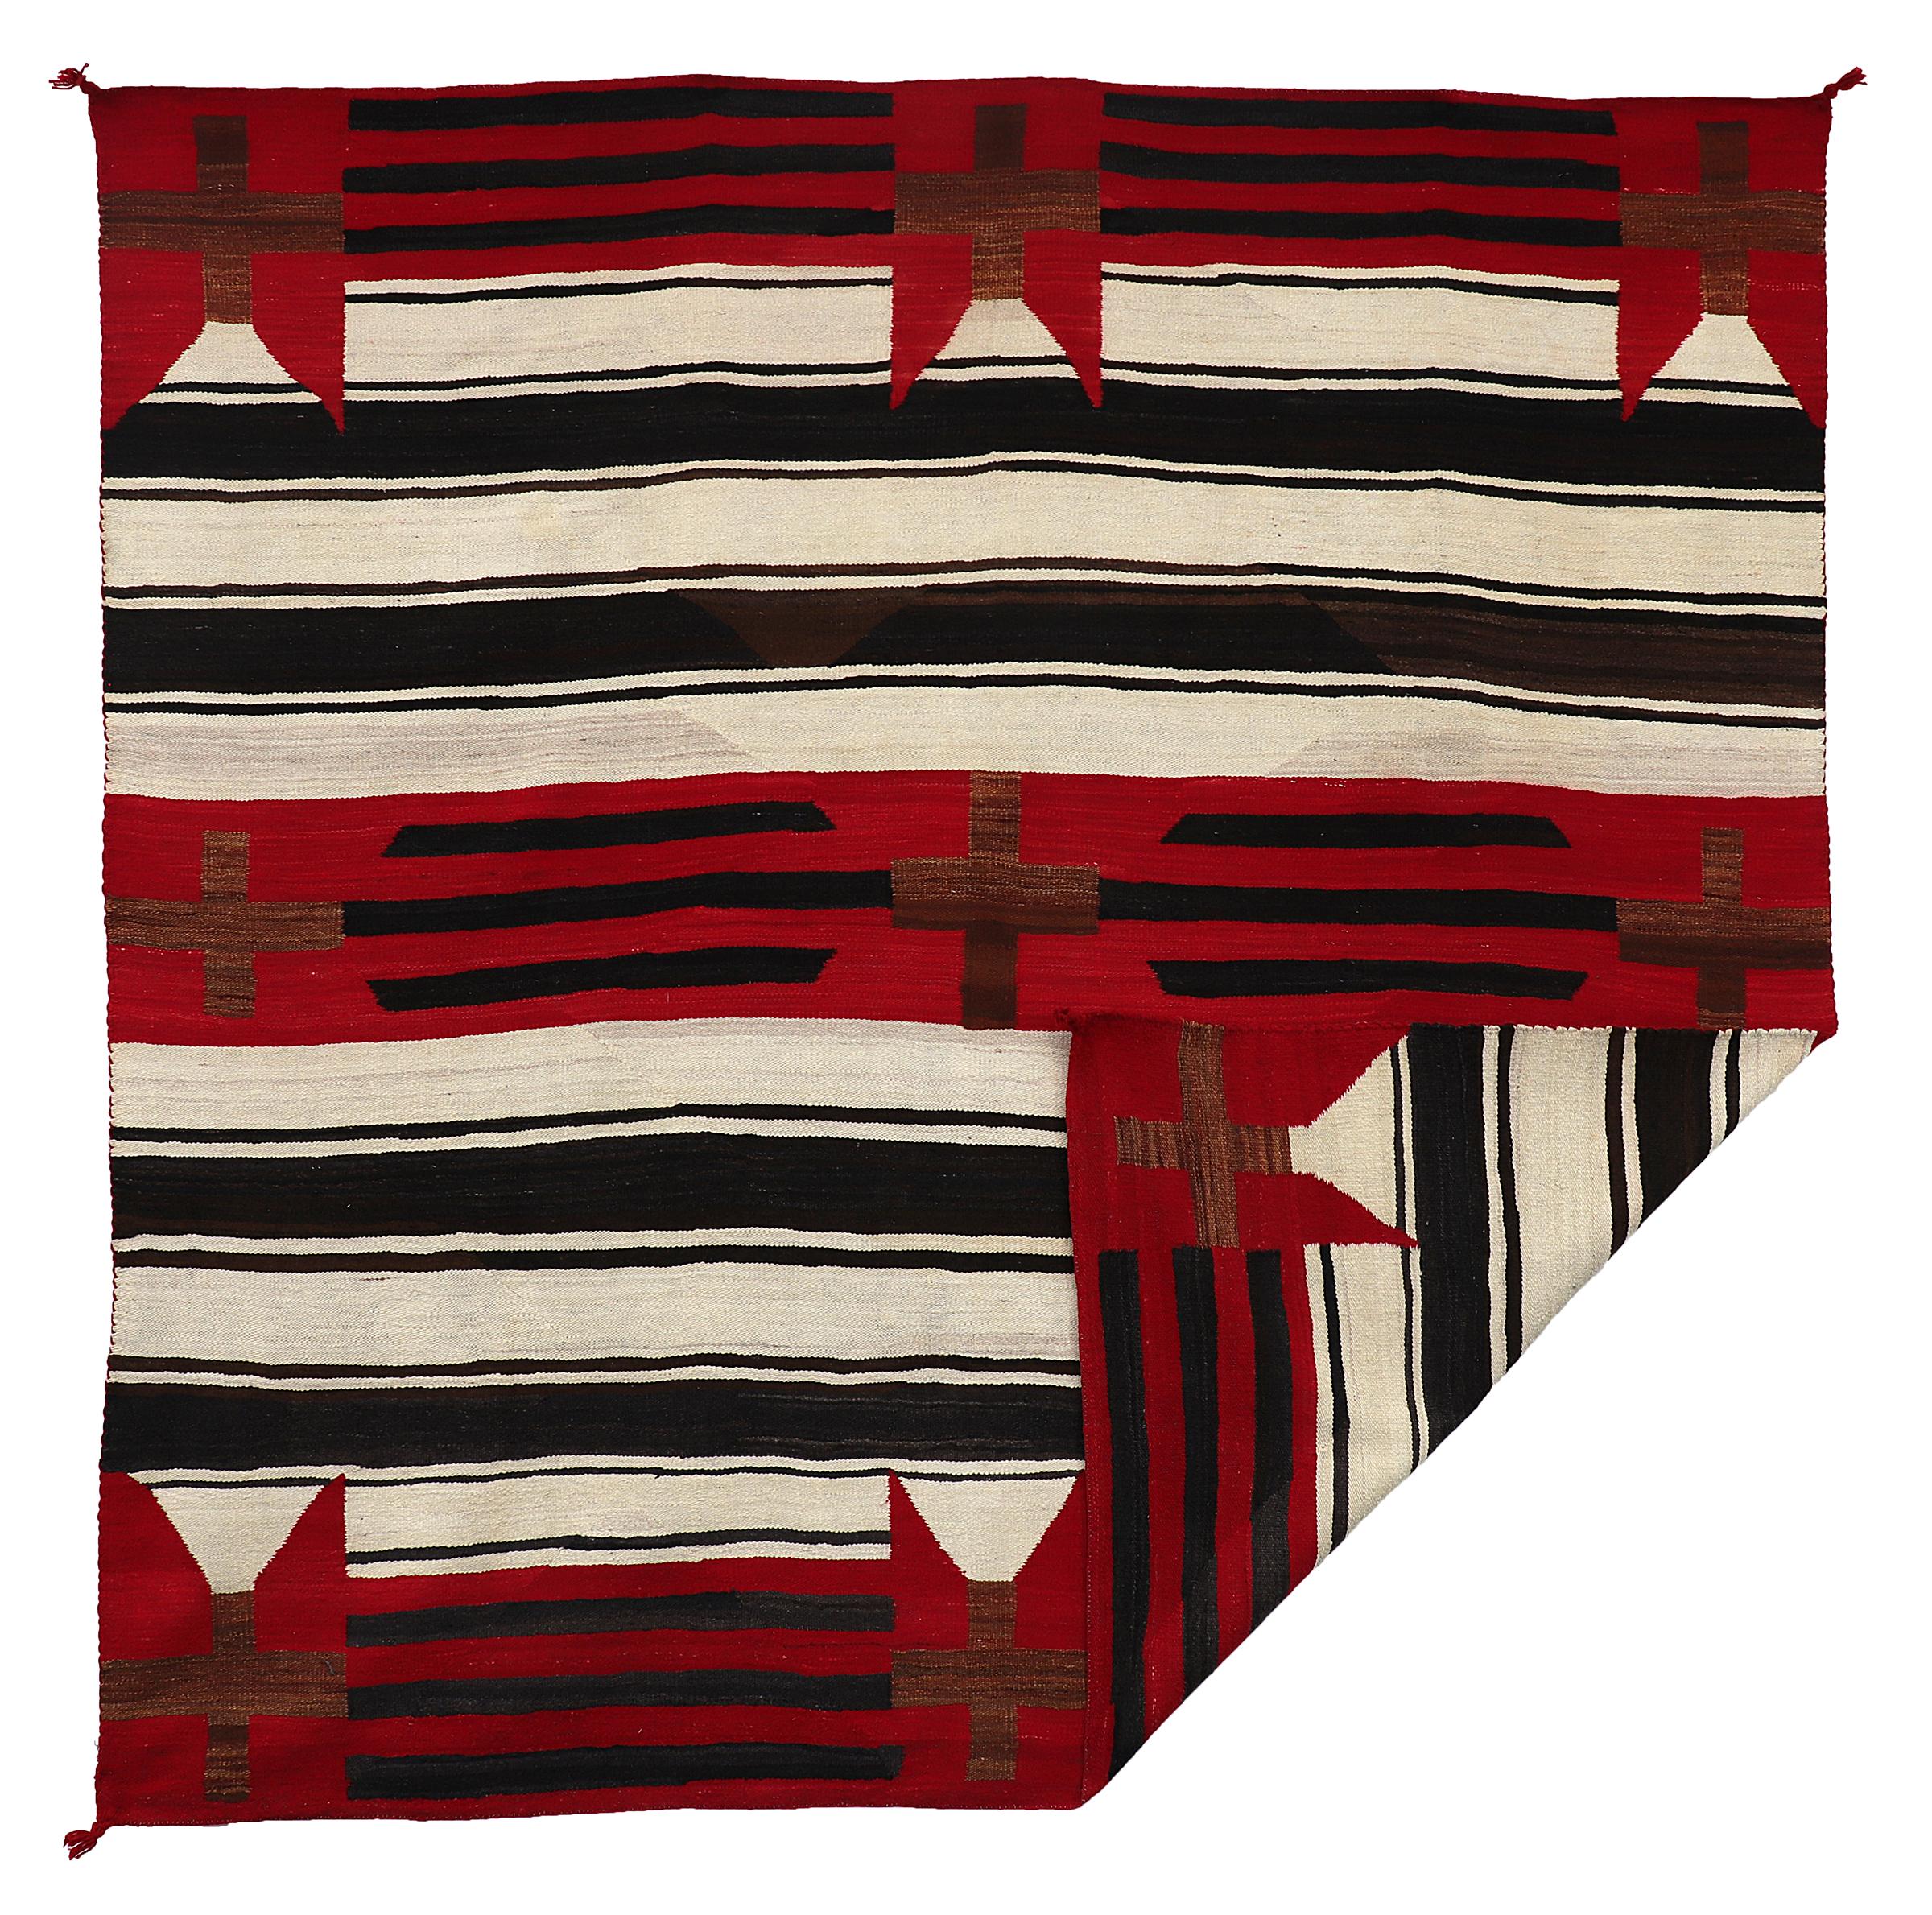 Navajo Chief's blanket circa 1930s created with wool and natural dyes. Outer dimensions measure 70 ¼ x 74 ? inches. 

13 Warp x 20 Weft

Weaving is in very good vintage condition.

 